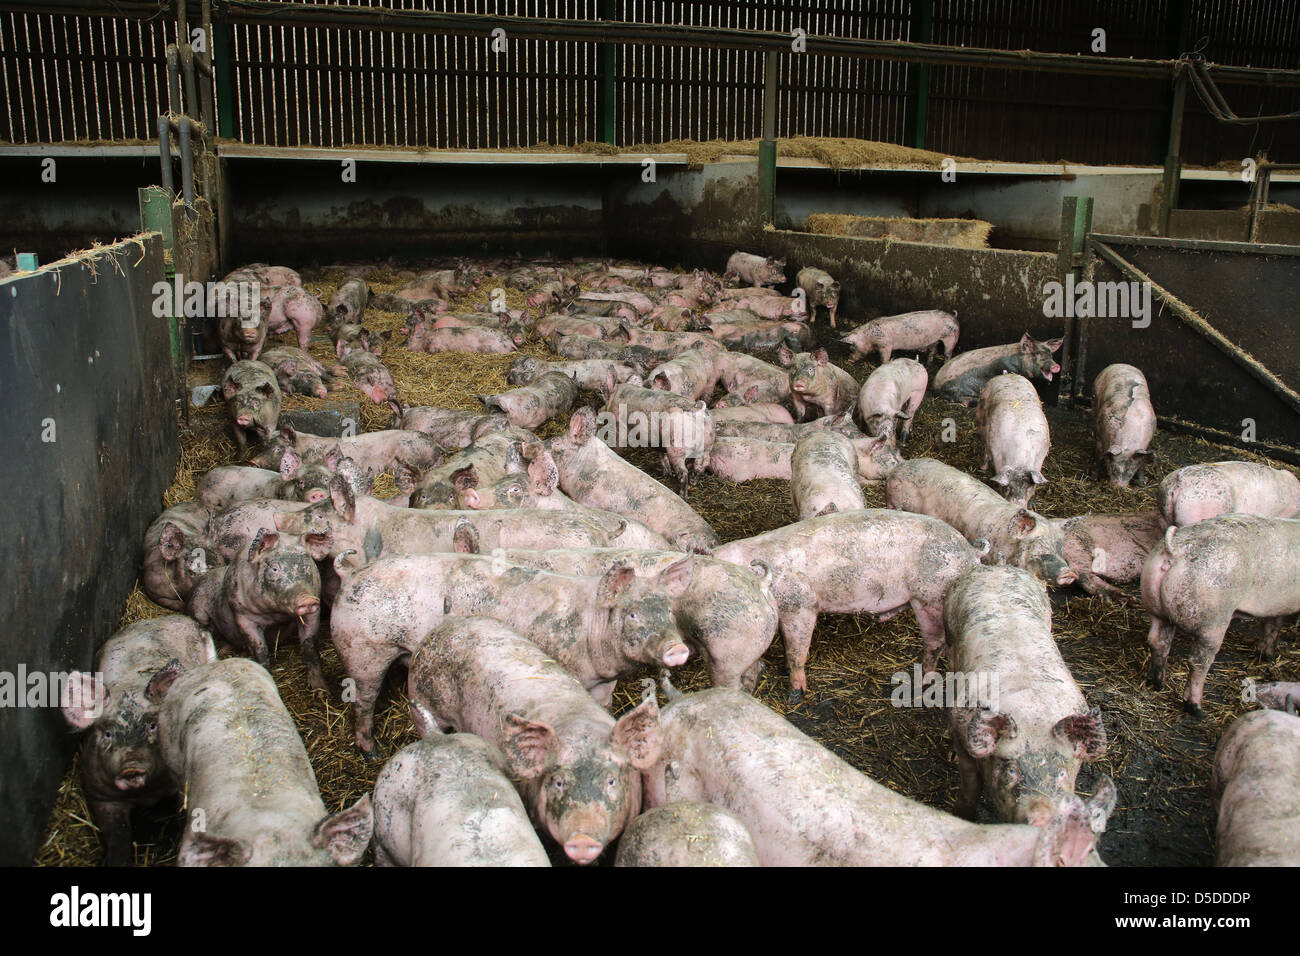 Pigs in a straw yard Stock Photo